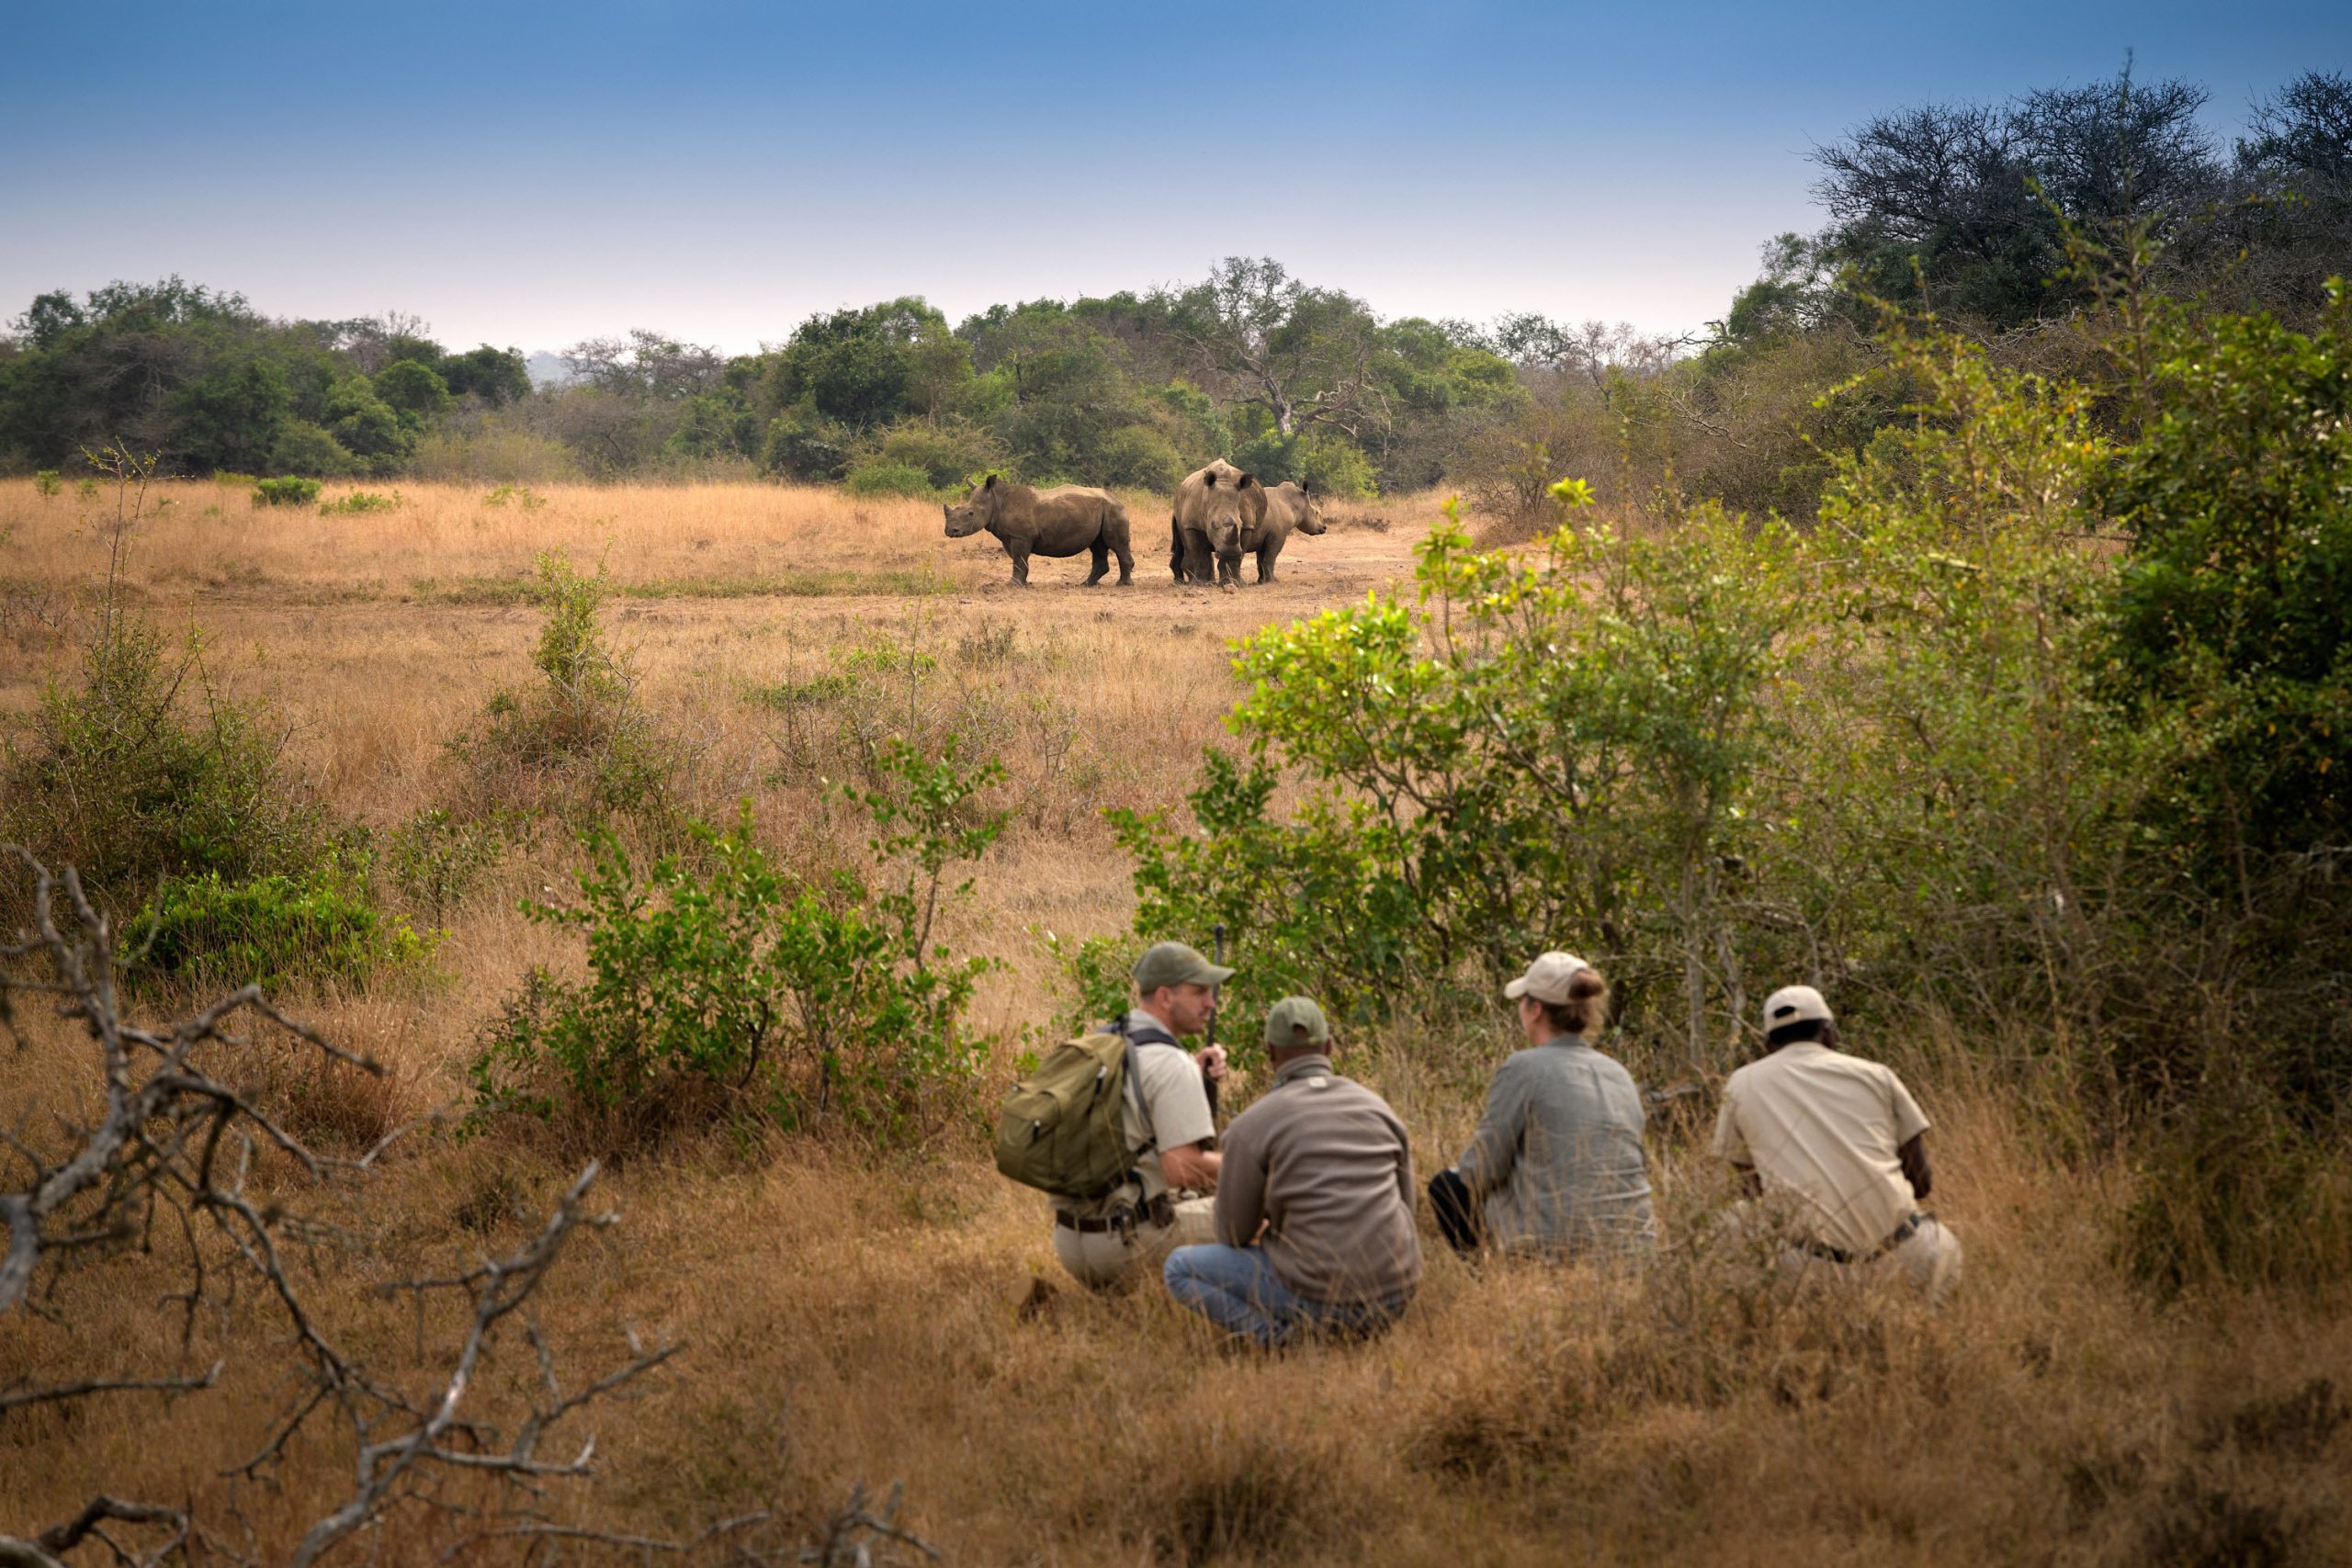 Tracking walking safari at Phinda Private Game Reserve, South Africa. 